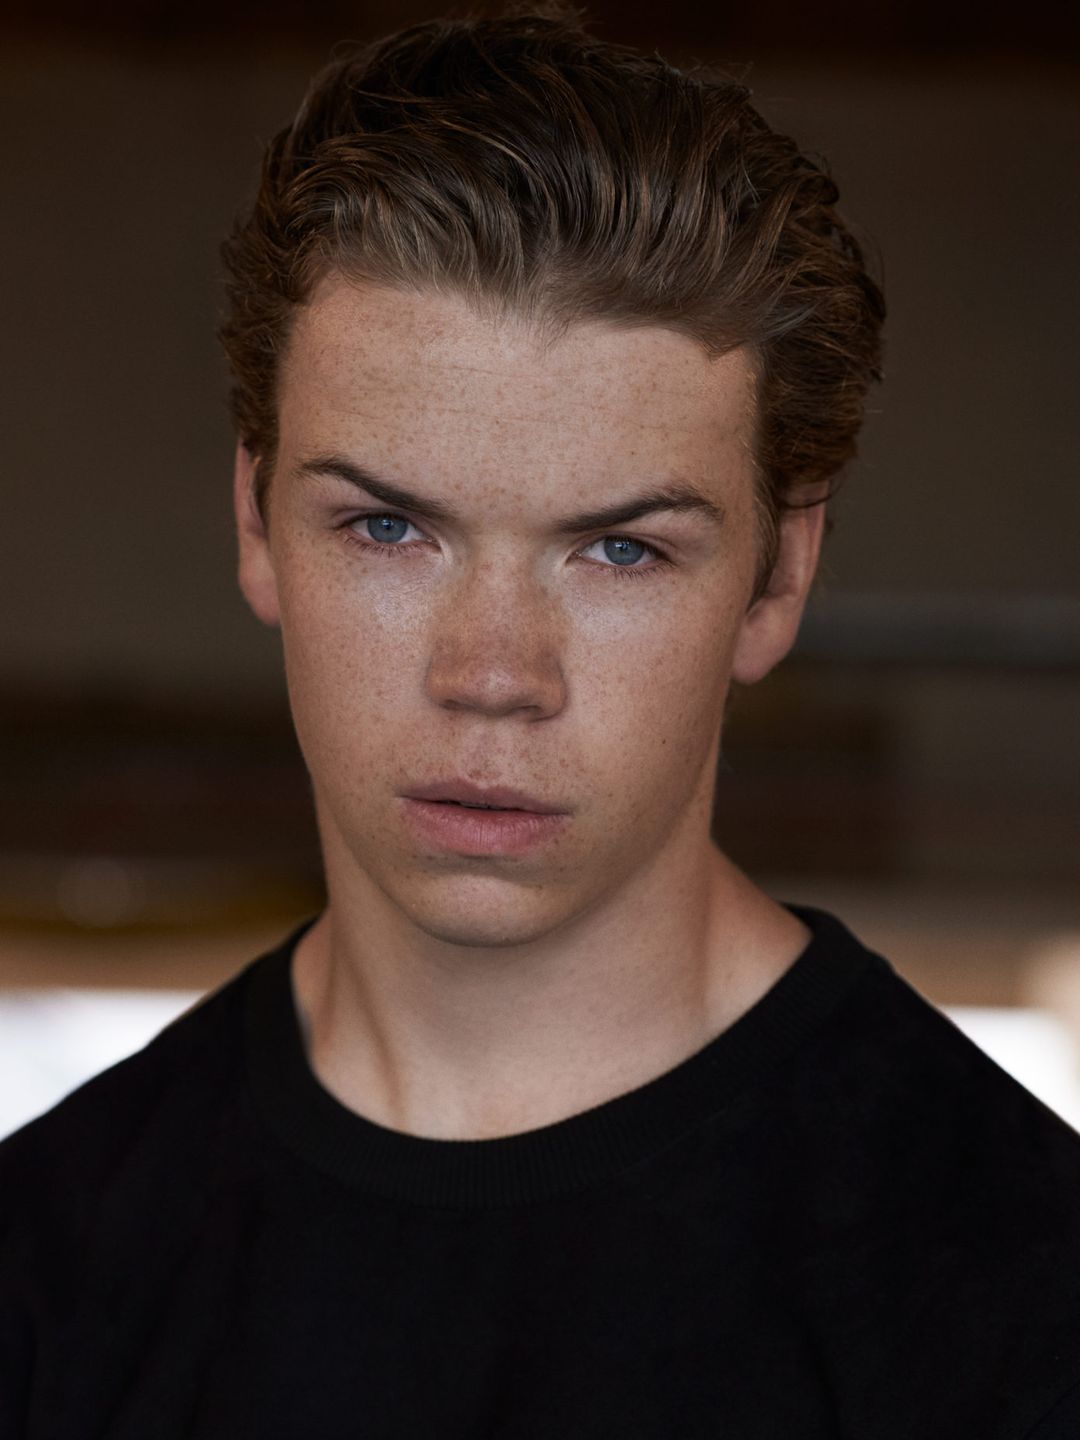 Will Poulter young photos